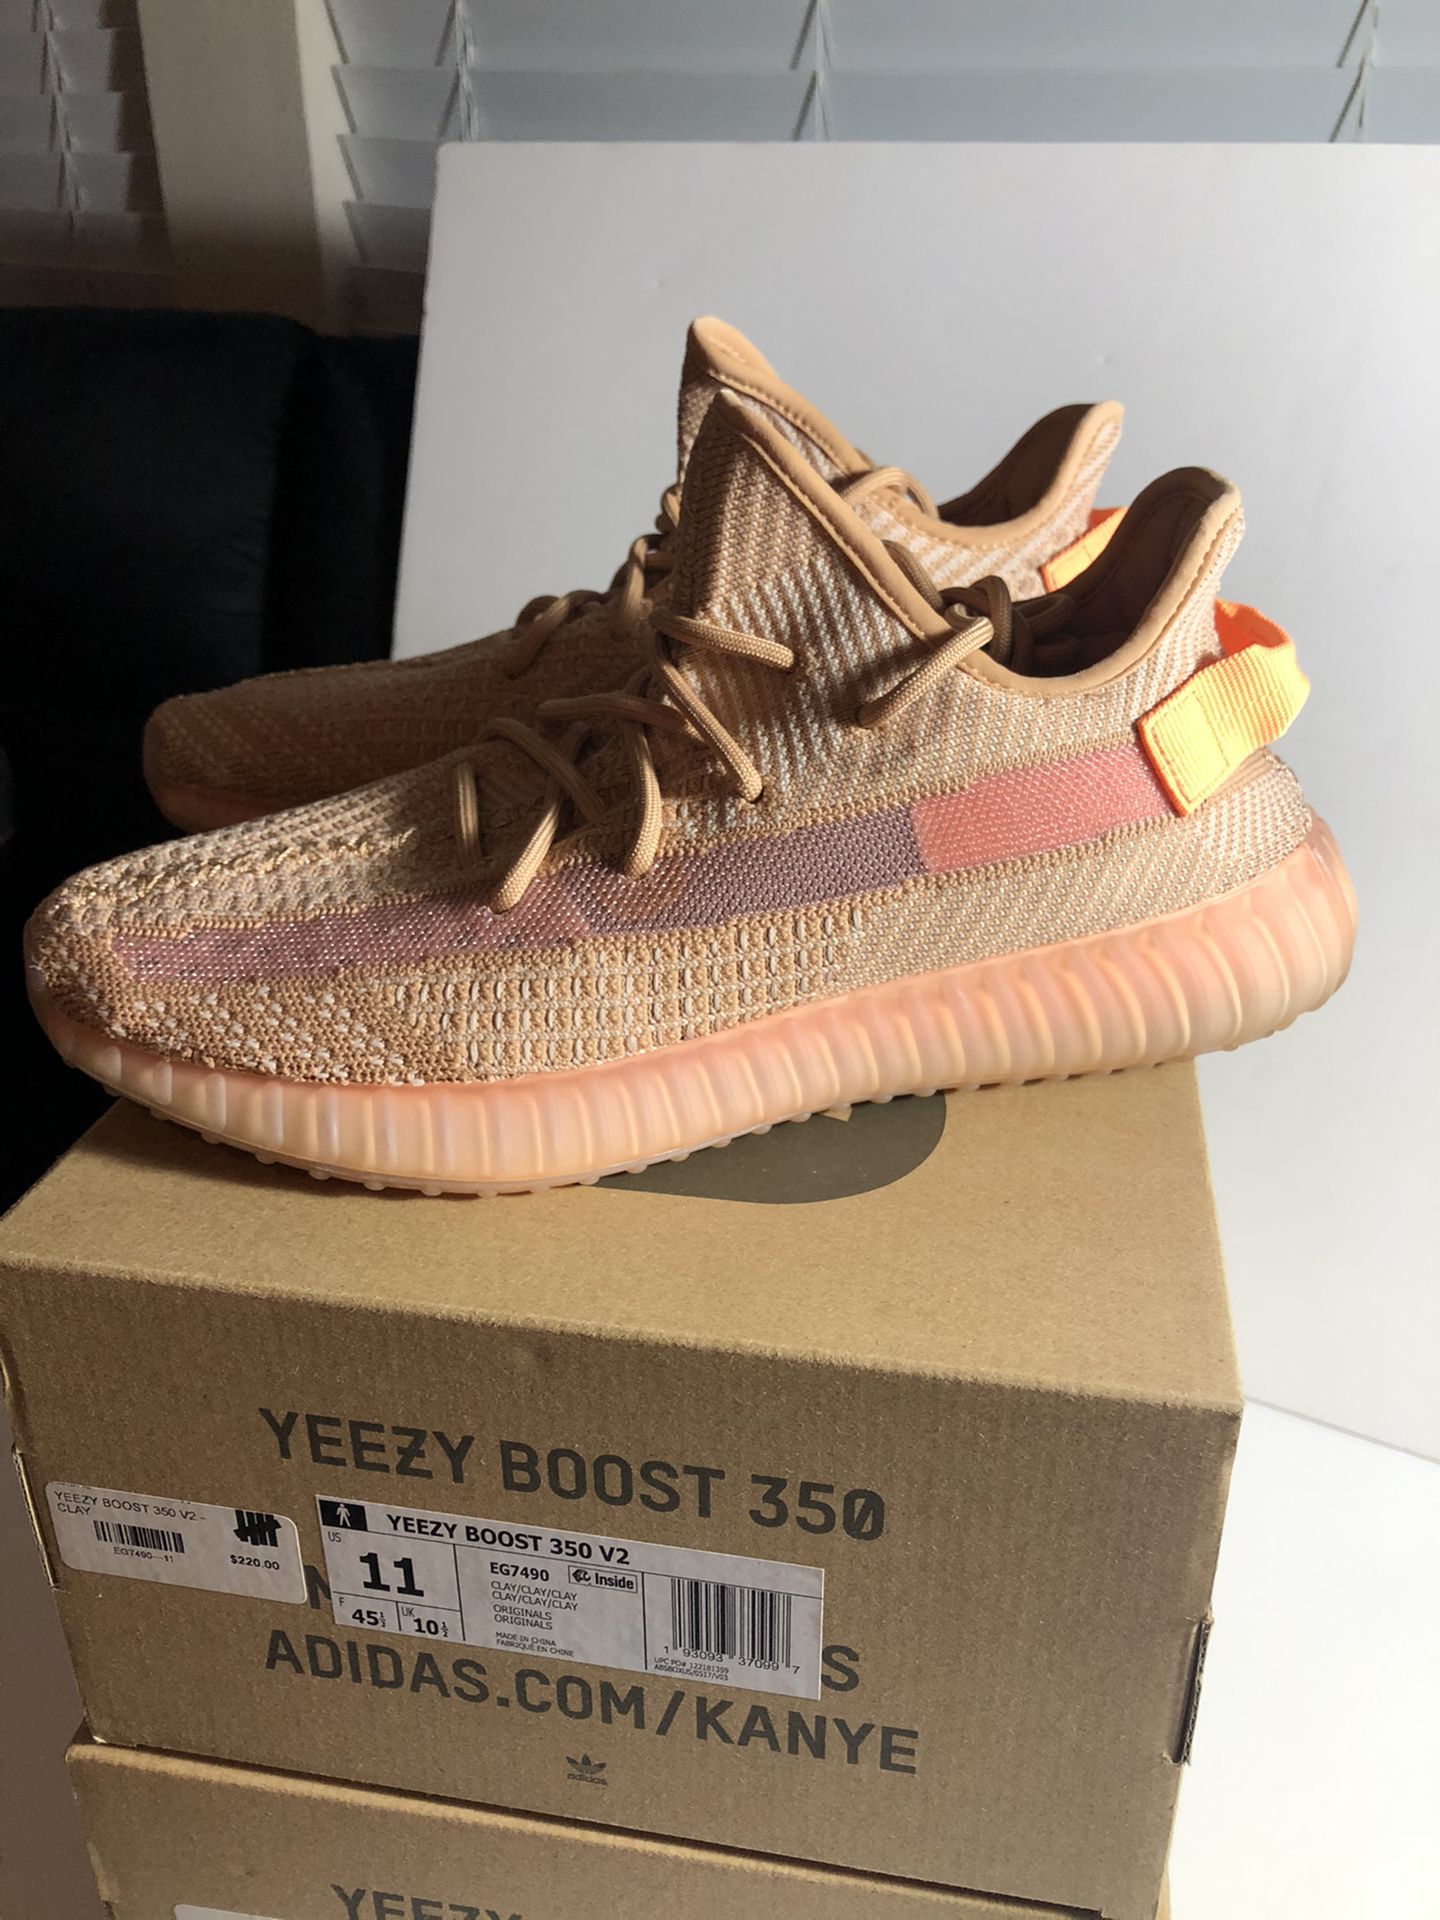 Adidas Yeezy 350 V2 clay size 11 and 11.5 used